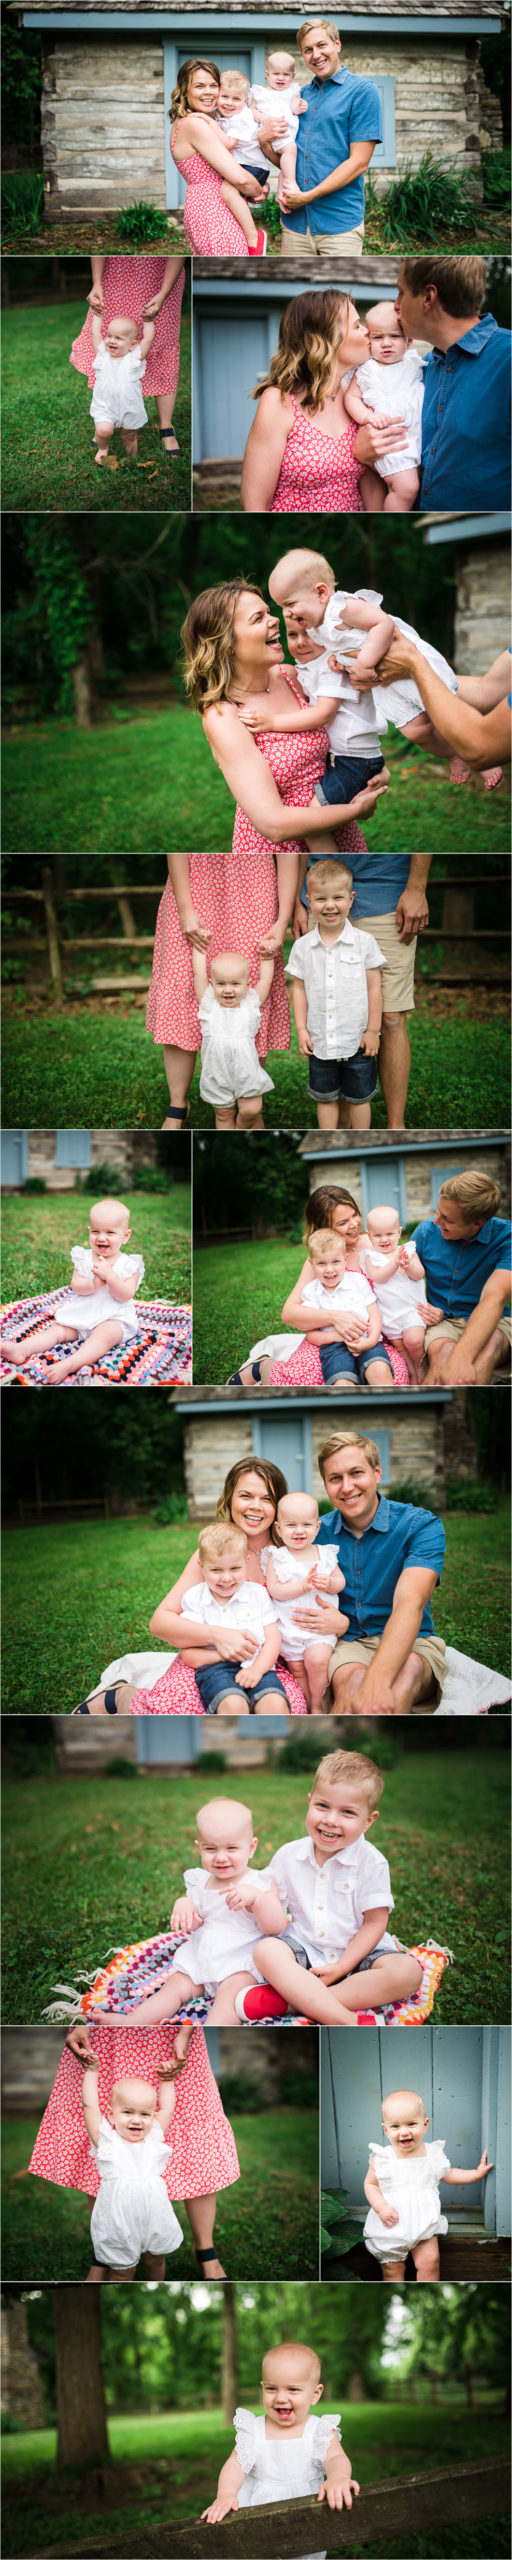 dudley woods family photo session cincinnati family photographer